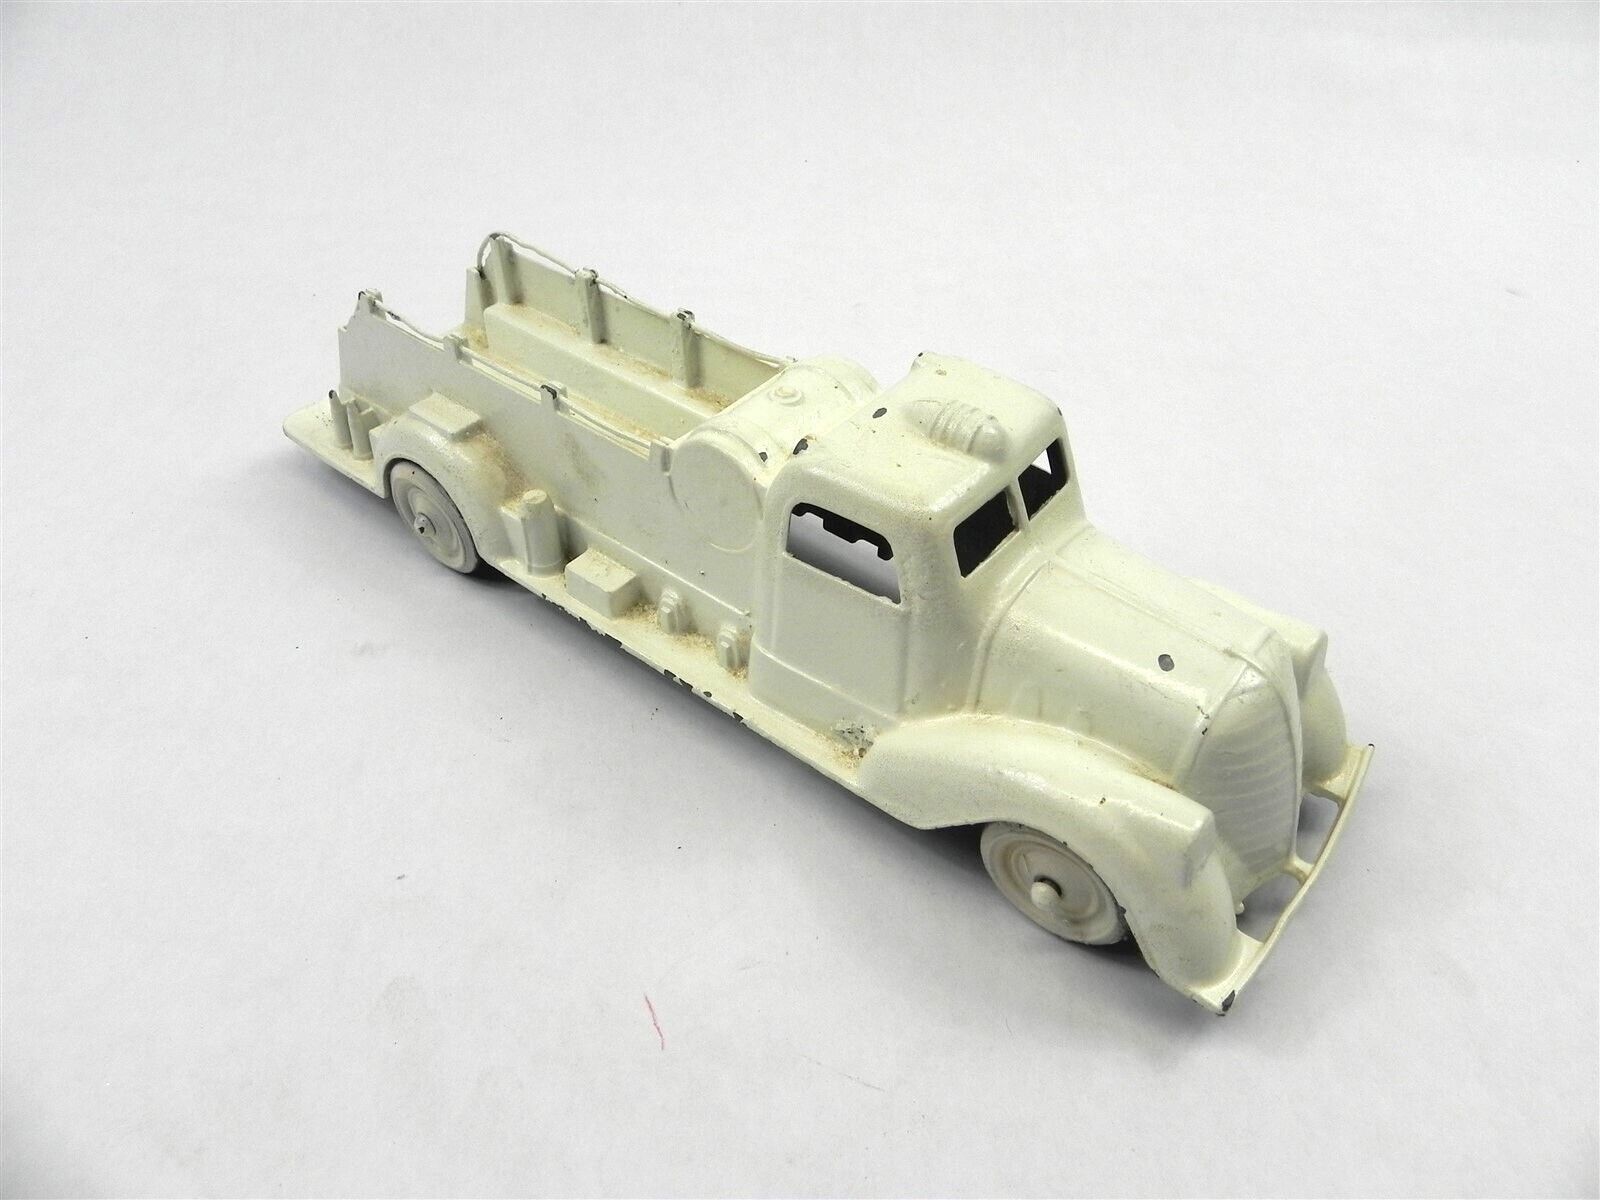 VINTAGE ANTIQUE METAL MASTERS FIRETRUCK PAINTED ALL WHITE VERY NICE COLLECTIBLE